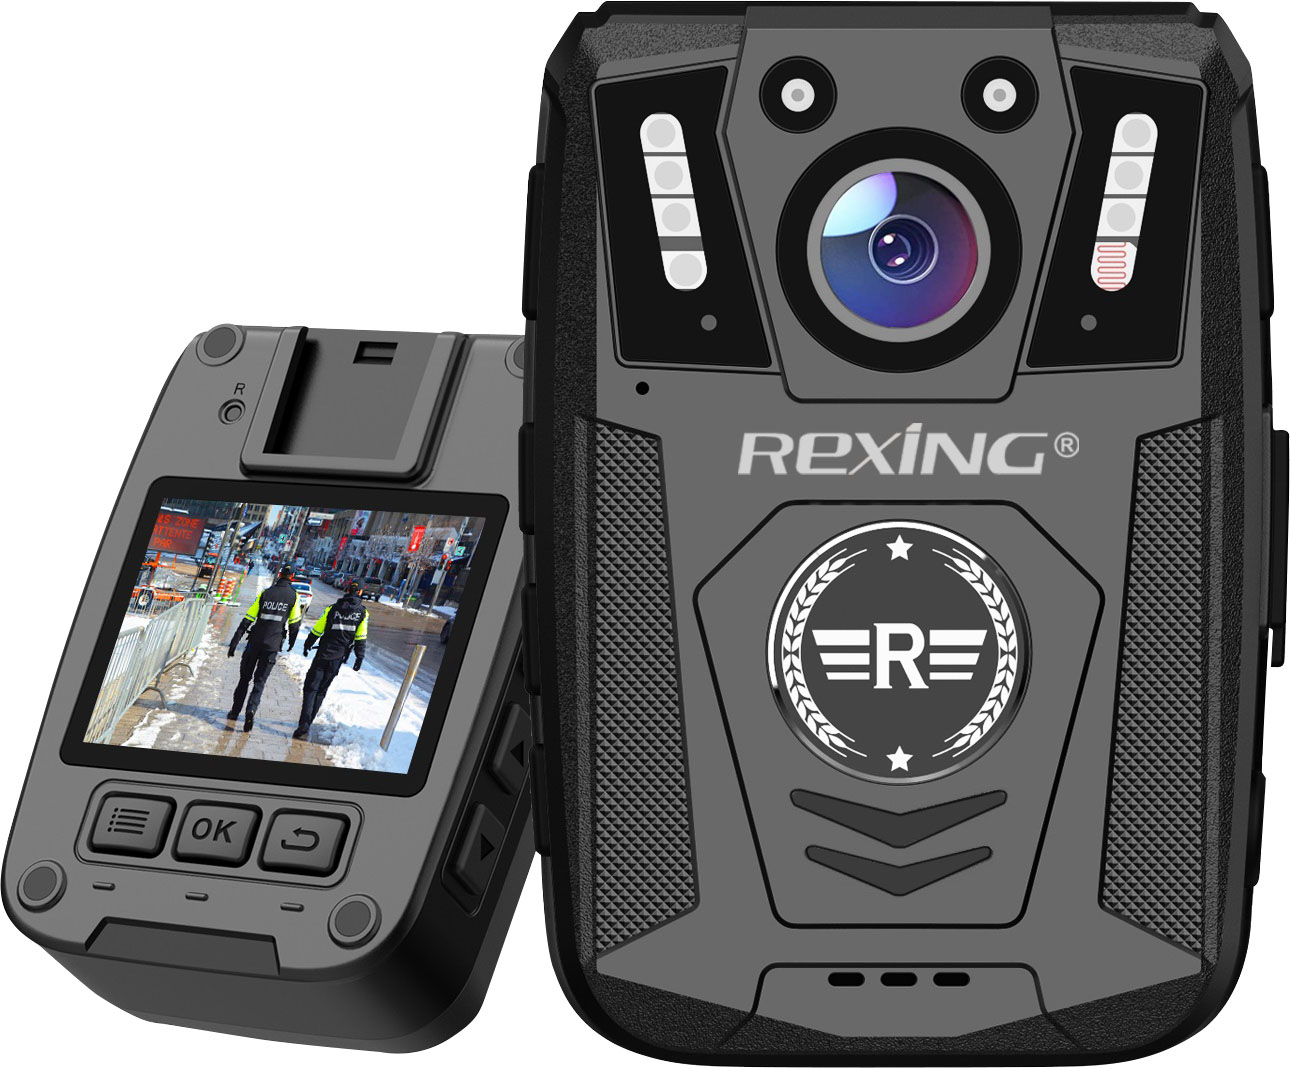 Angle View: Rexing - P1 1080p FHD Body Camera with 64GB Internal Memory - Black